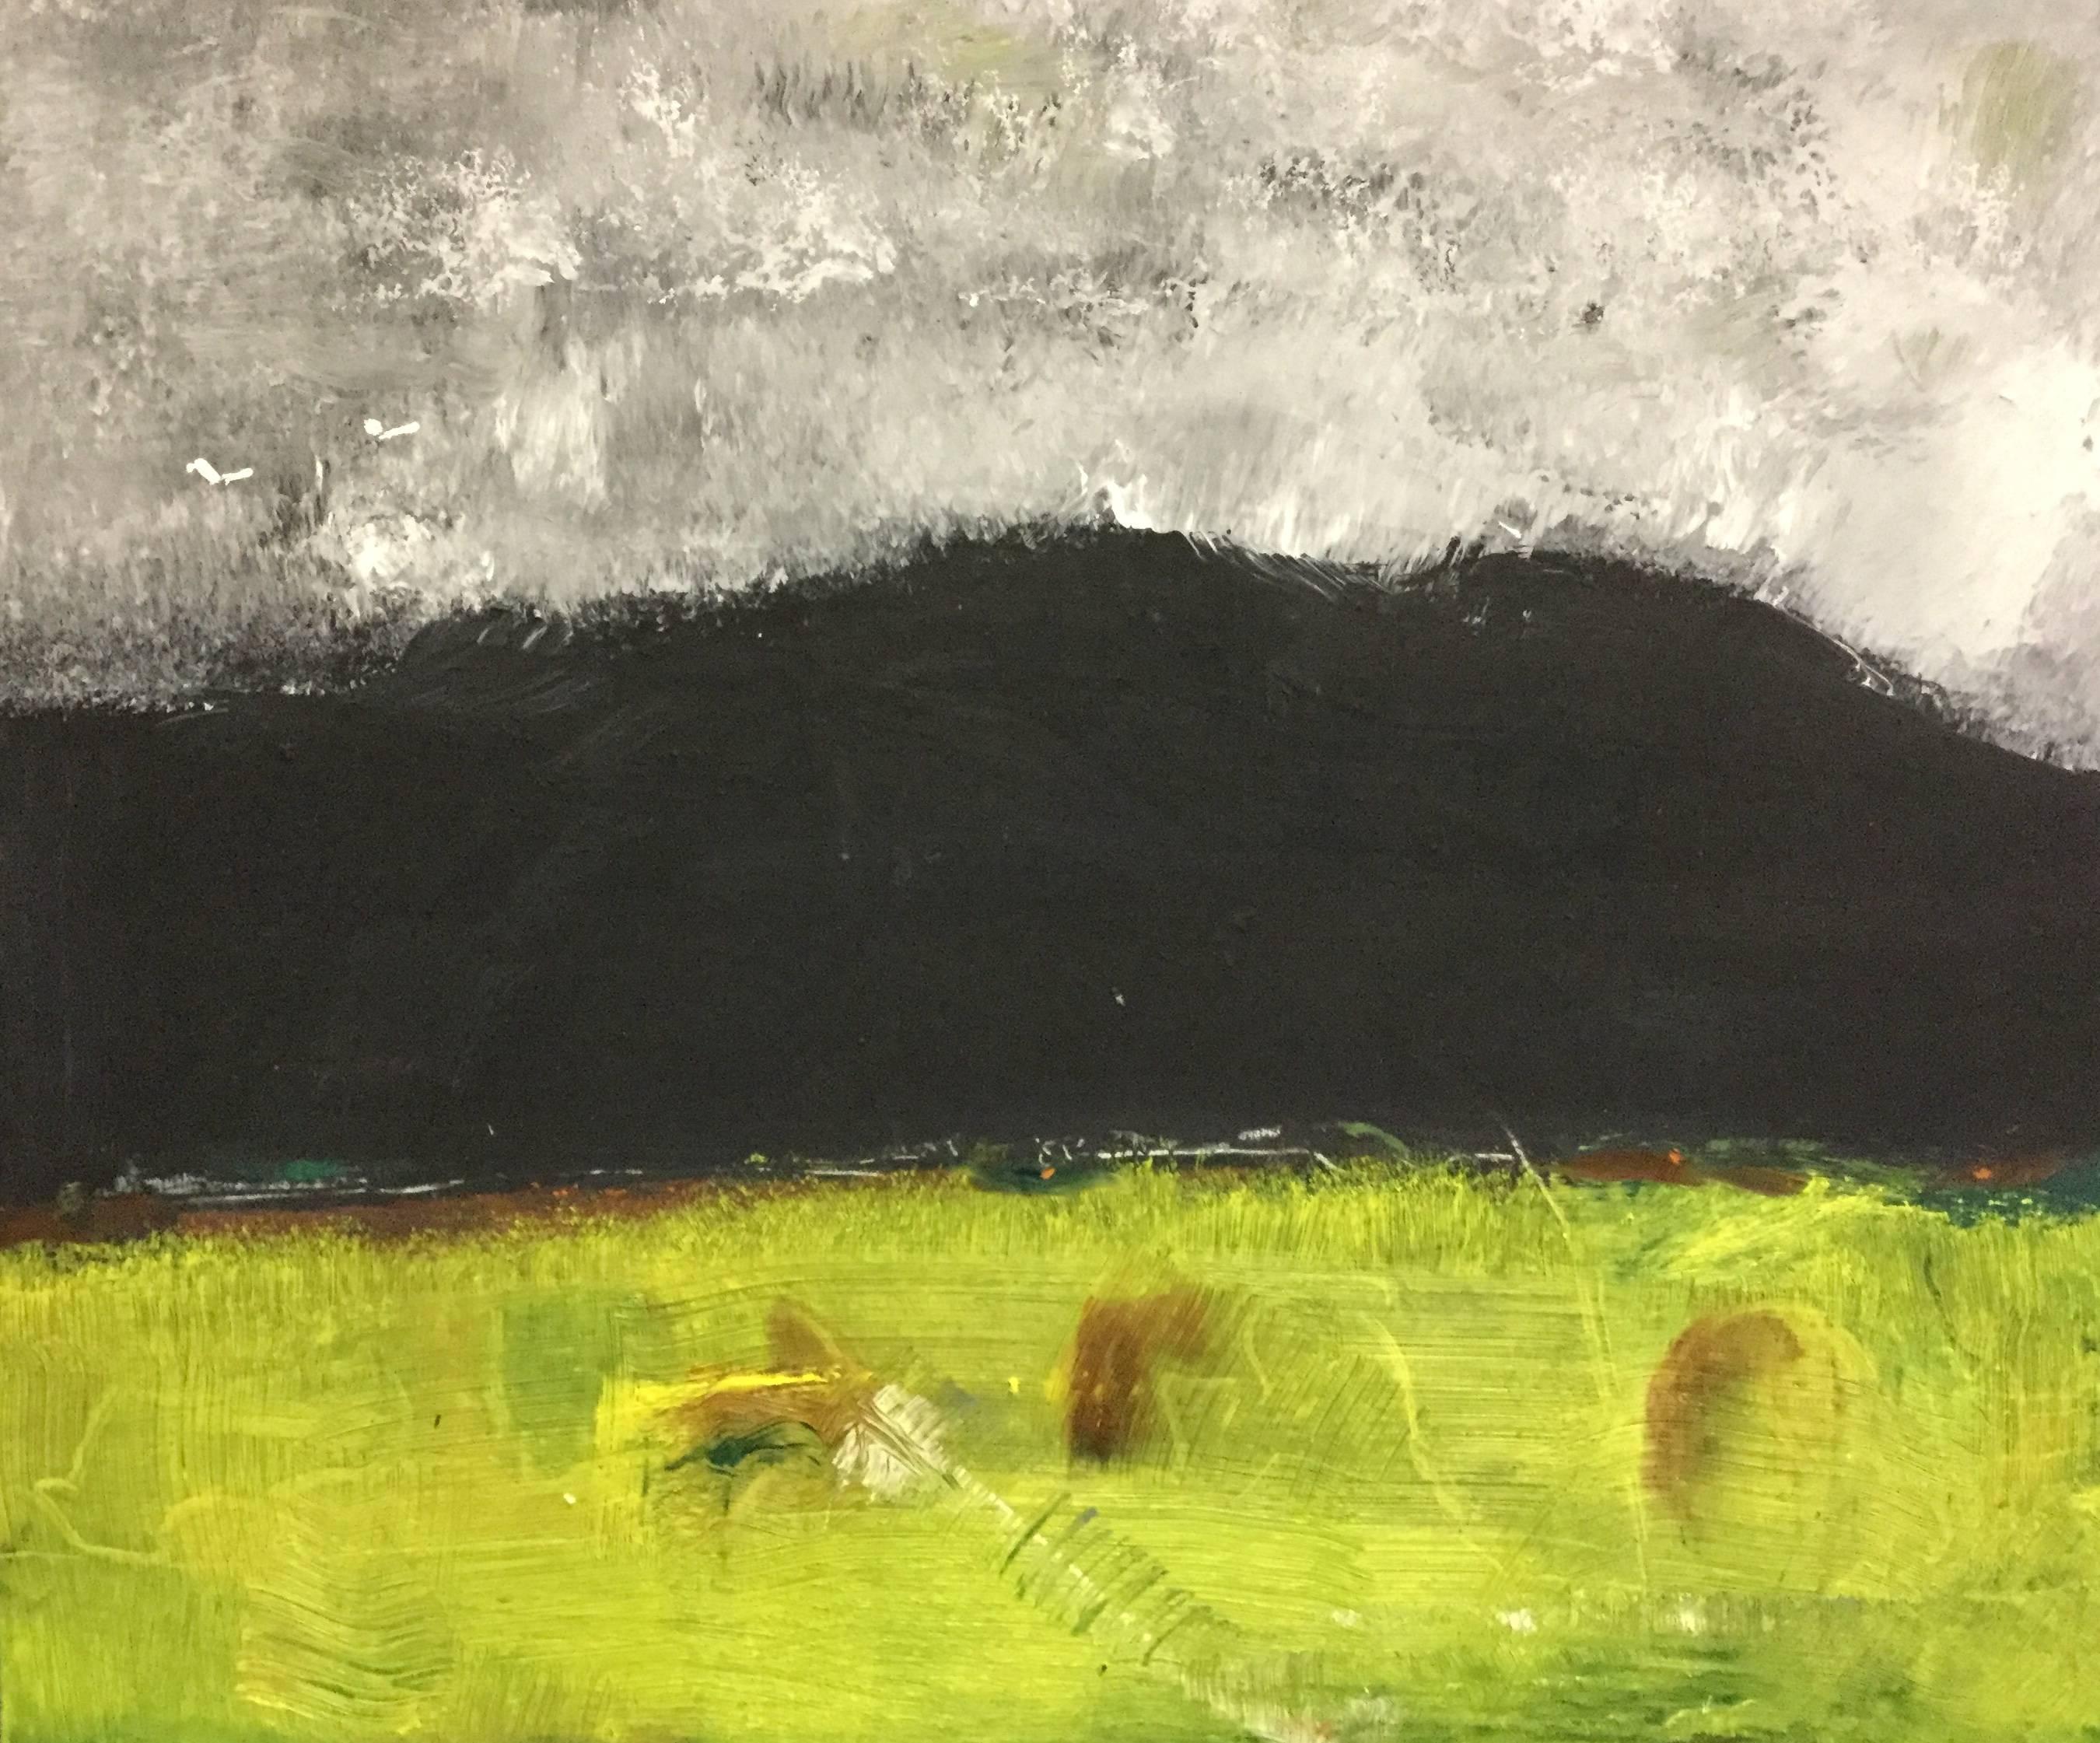 Abstract expressionist landscape from welsh artist Peter Rossiter
Oil on mounted board